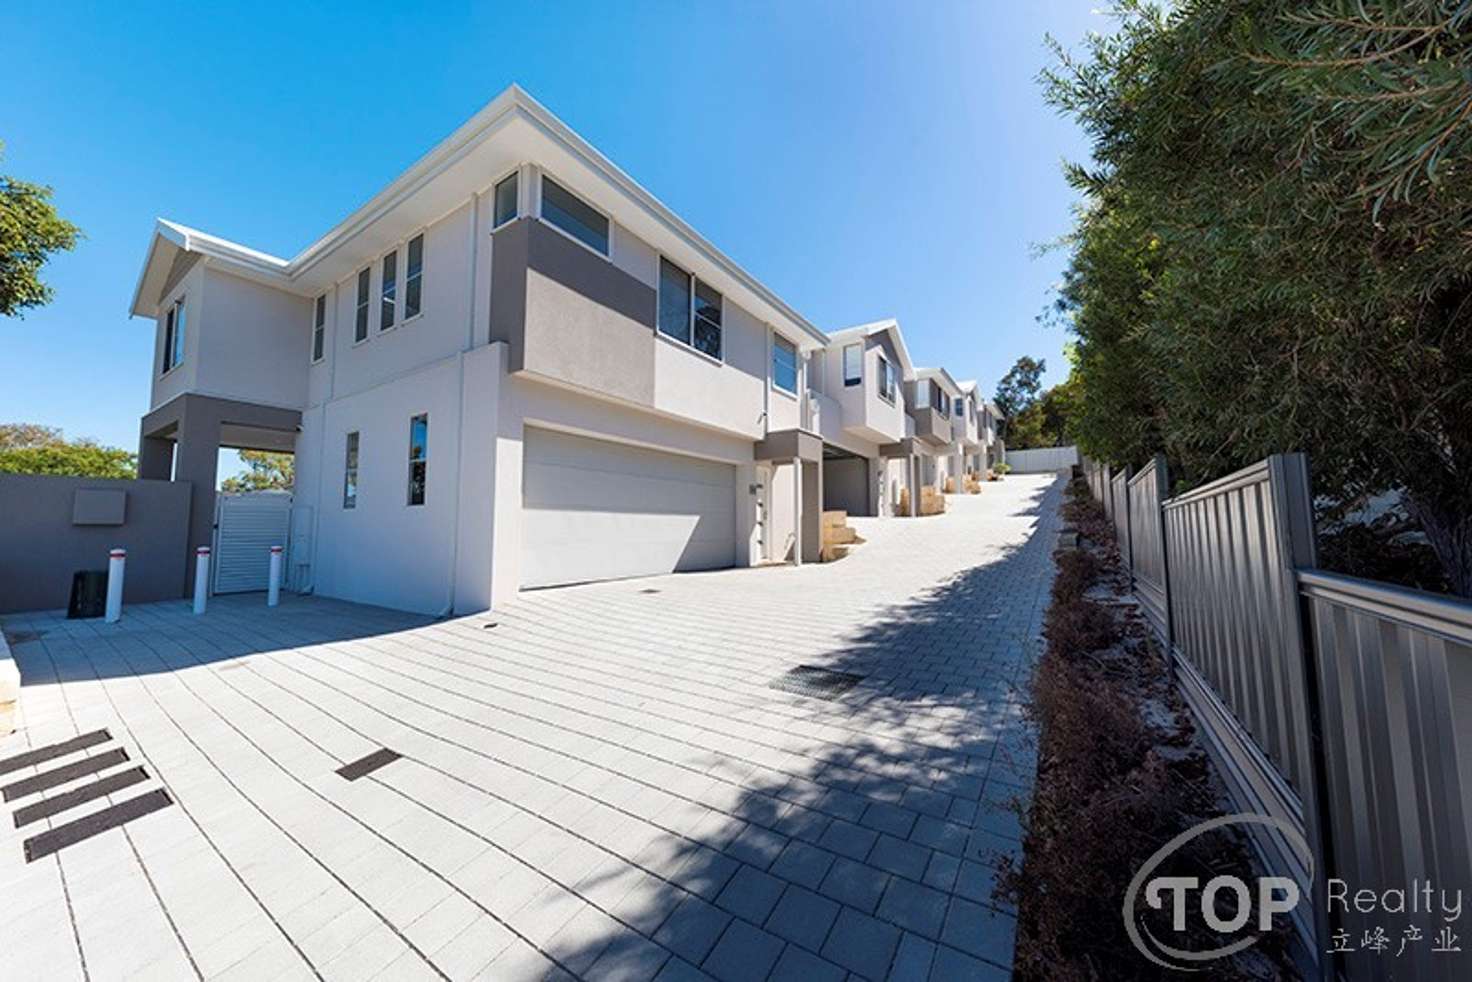 Main view of Homely townhouse listing, 78E Arkwell St, Willagee WA 6156